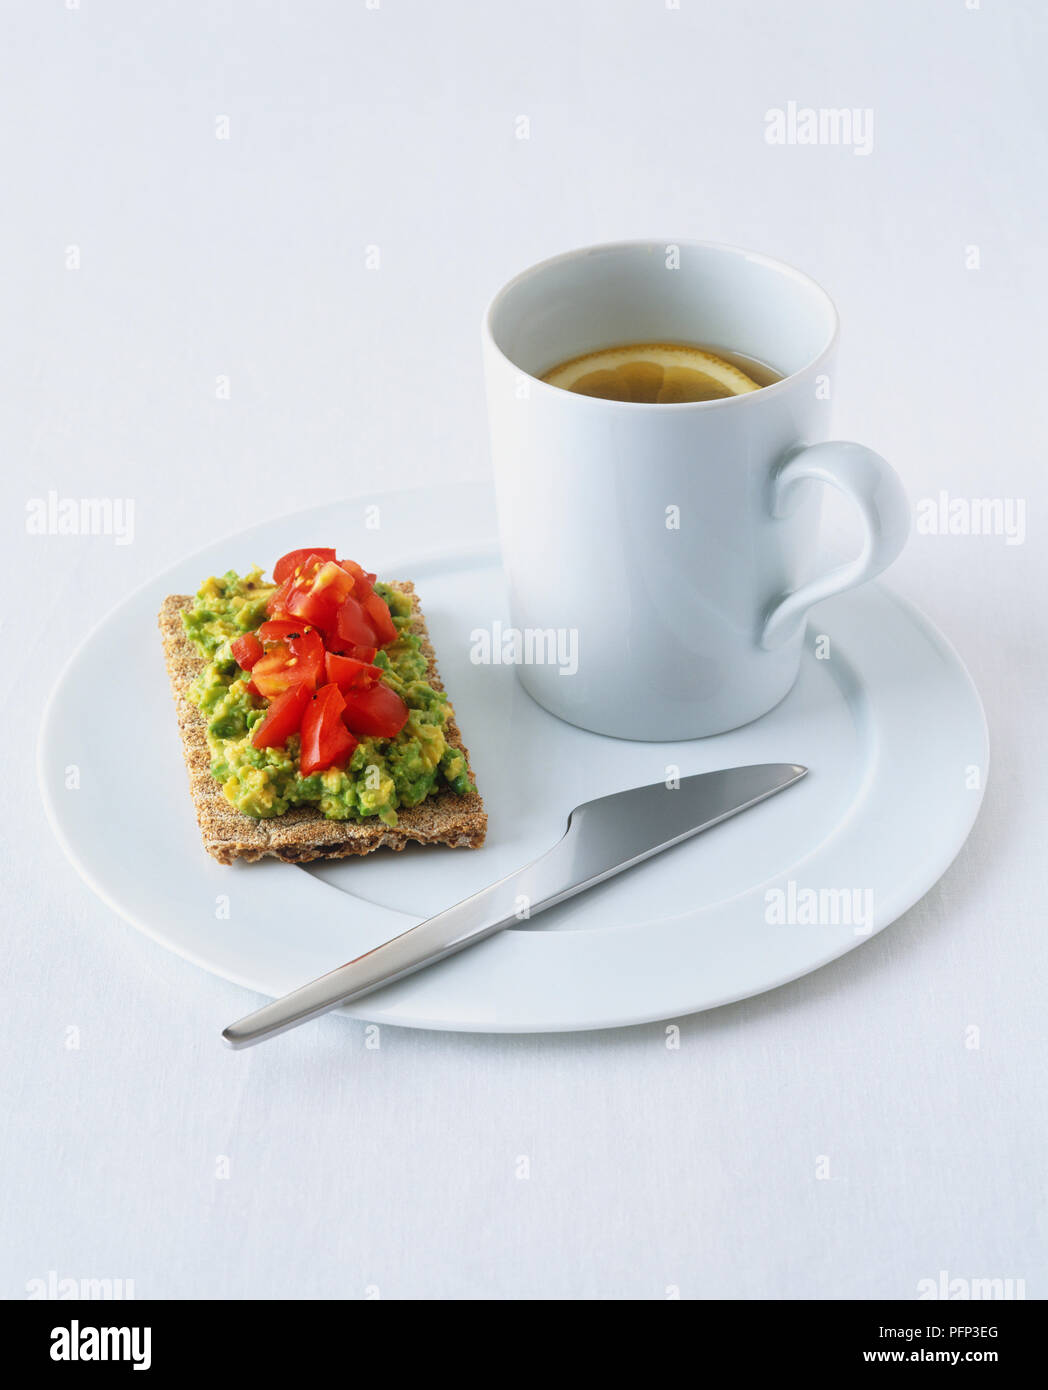 Mug of clear soup served on white ceramic plate, with rye crispbread topped with avocado spread and chopped tomatoes Stock Photo